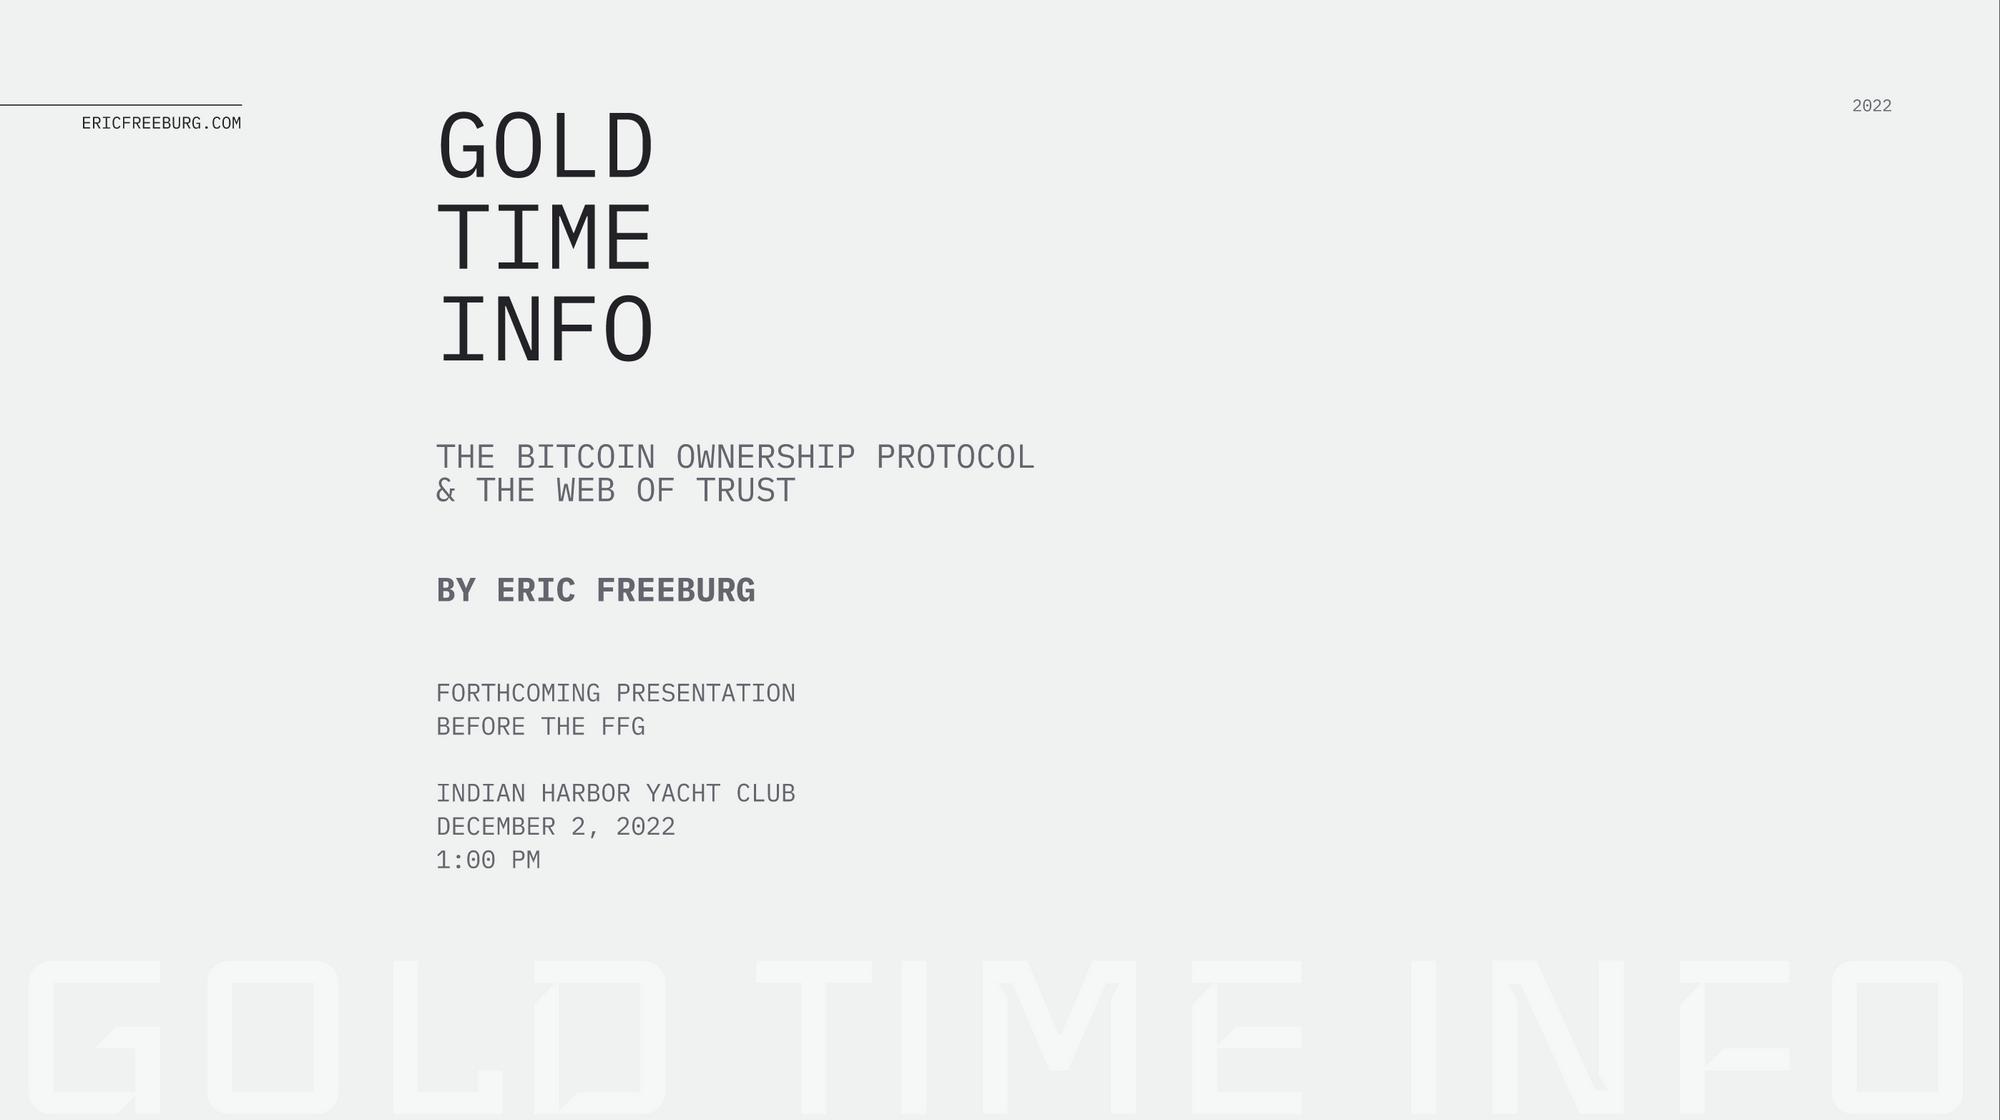 GOLD TIME INFO